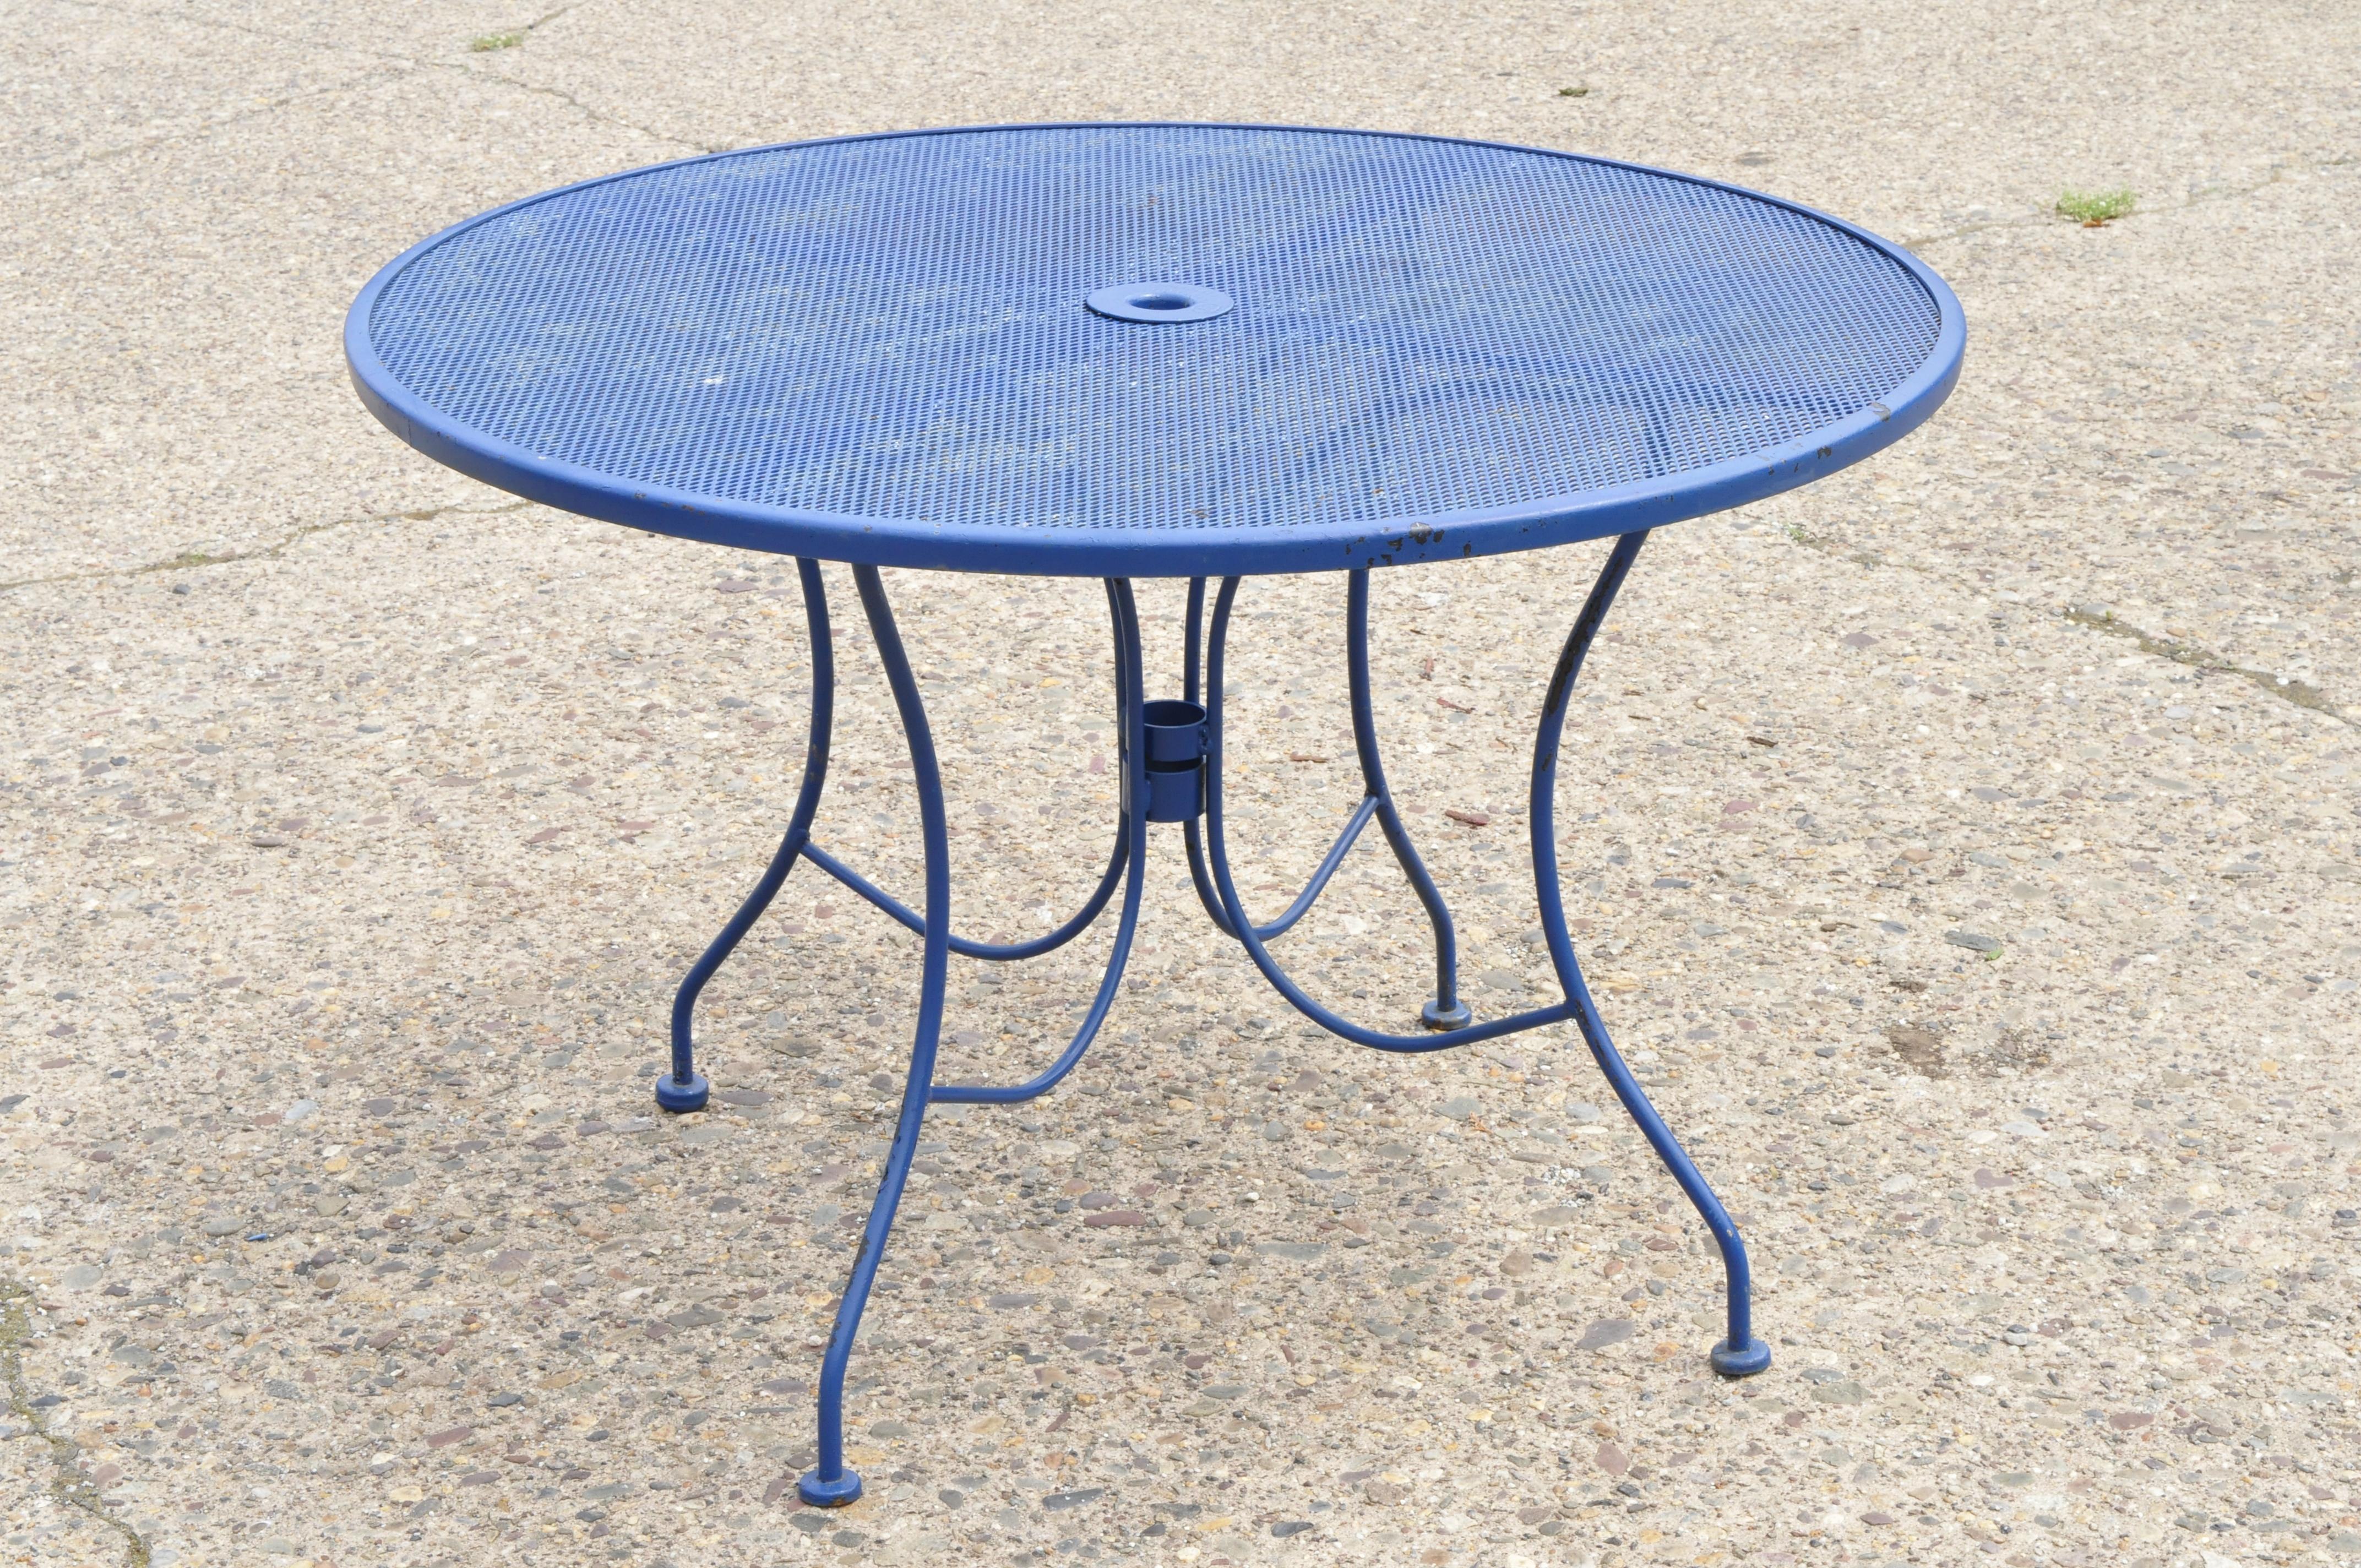 Woodard pinecrest blue wrought iron 5-piece patio garden dining set with 4 chairs and round table. Listing includes (4) chairs, round mesh top table, wrought iron construction, quality American craftsmanship, great style and form, circa mid-20th